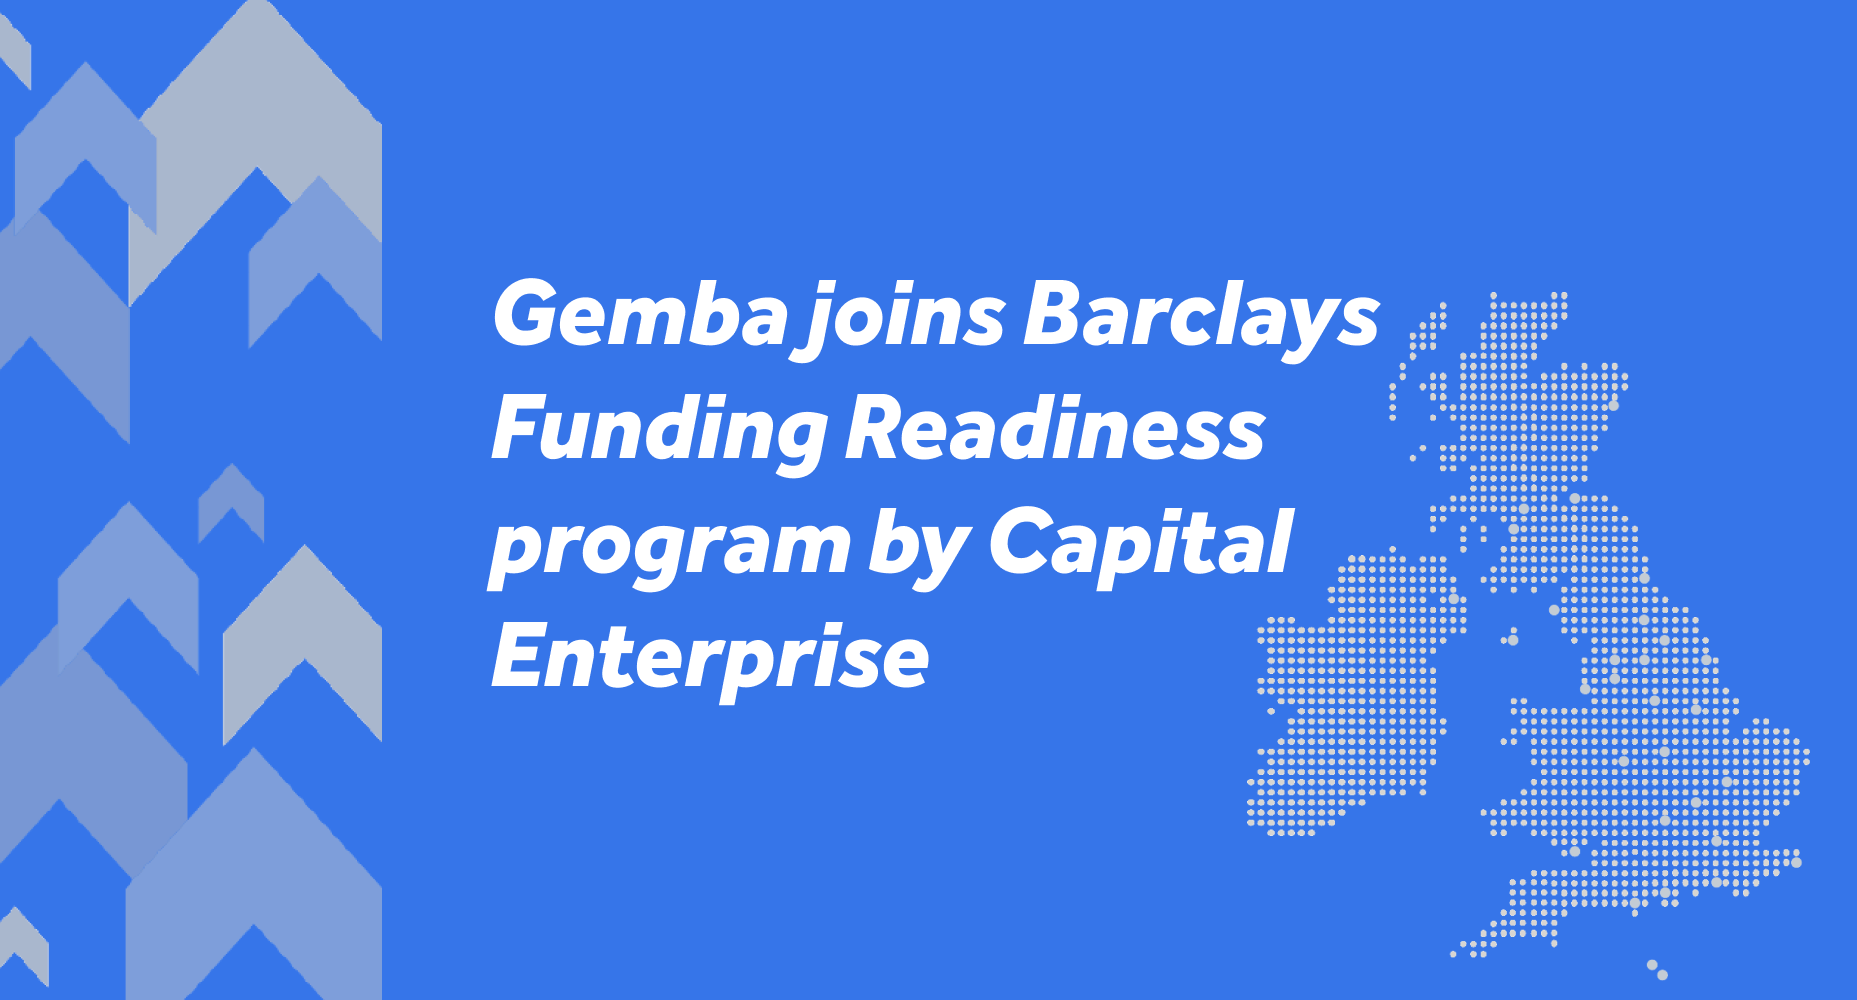 Gemba joins Barclays Funding Readiness Programme powered by Capital Enterprise